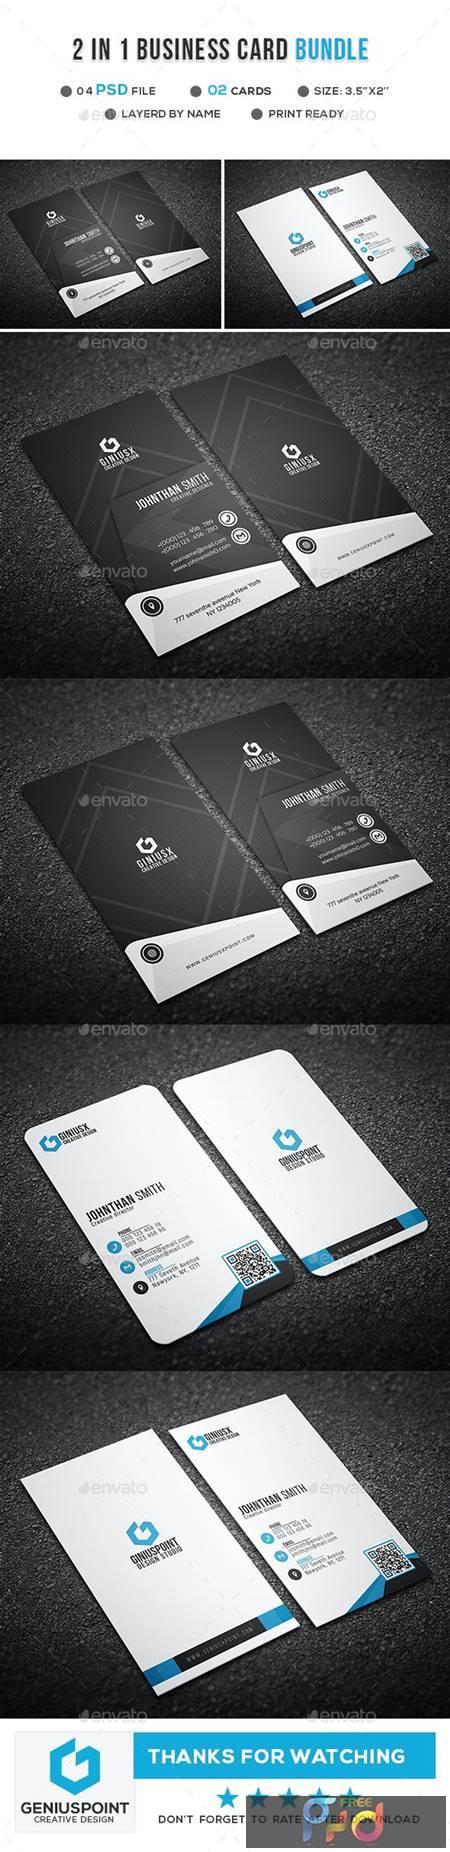 in 1 Business Card Bundle